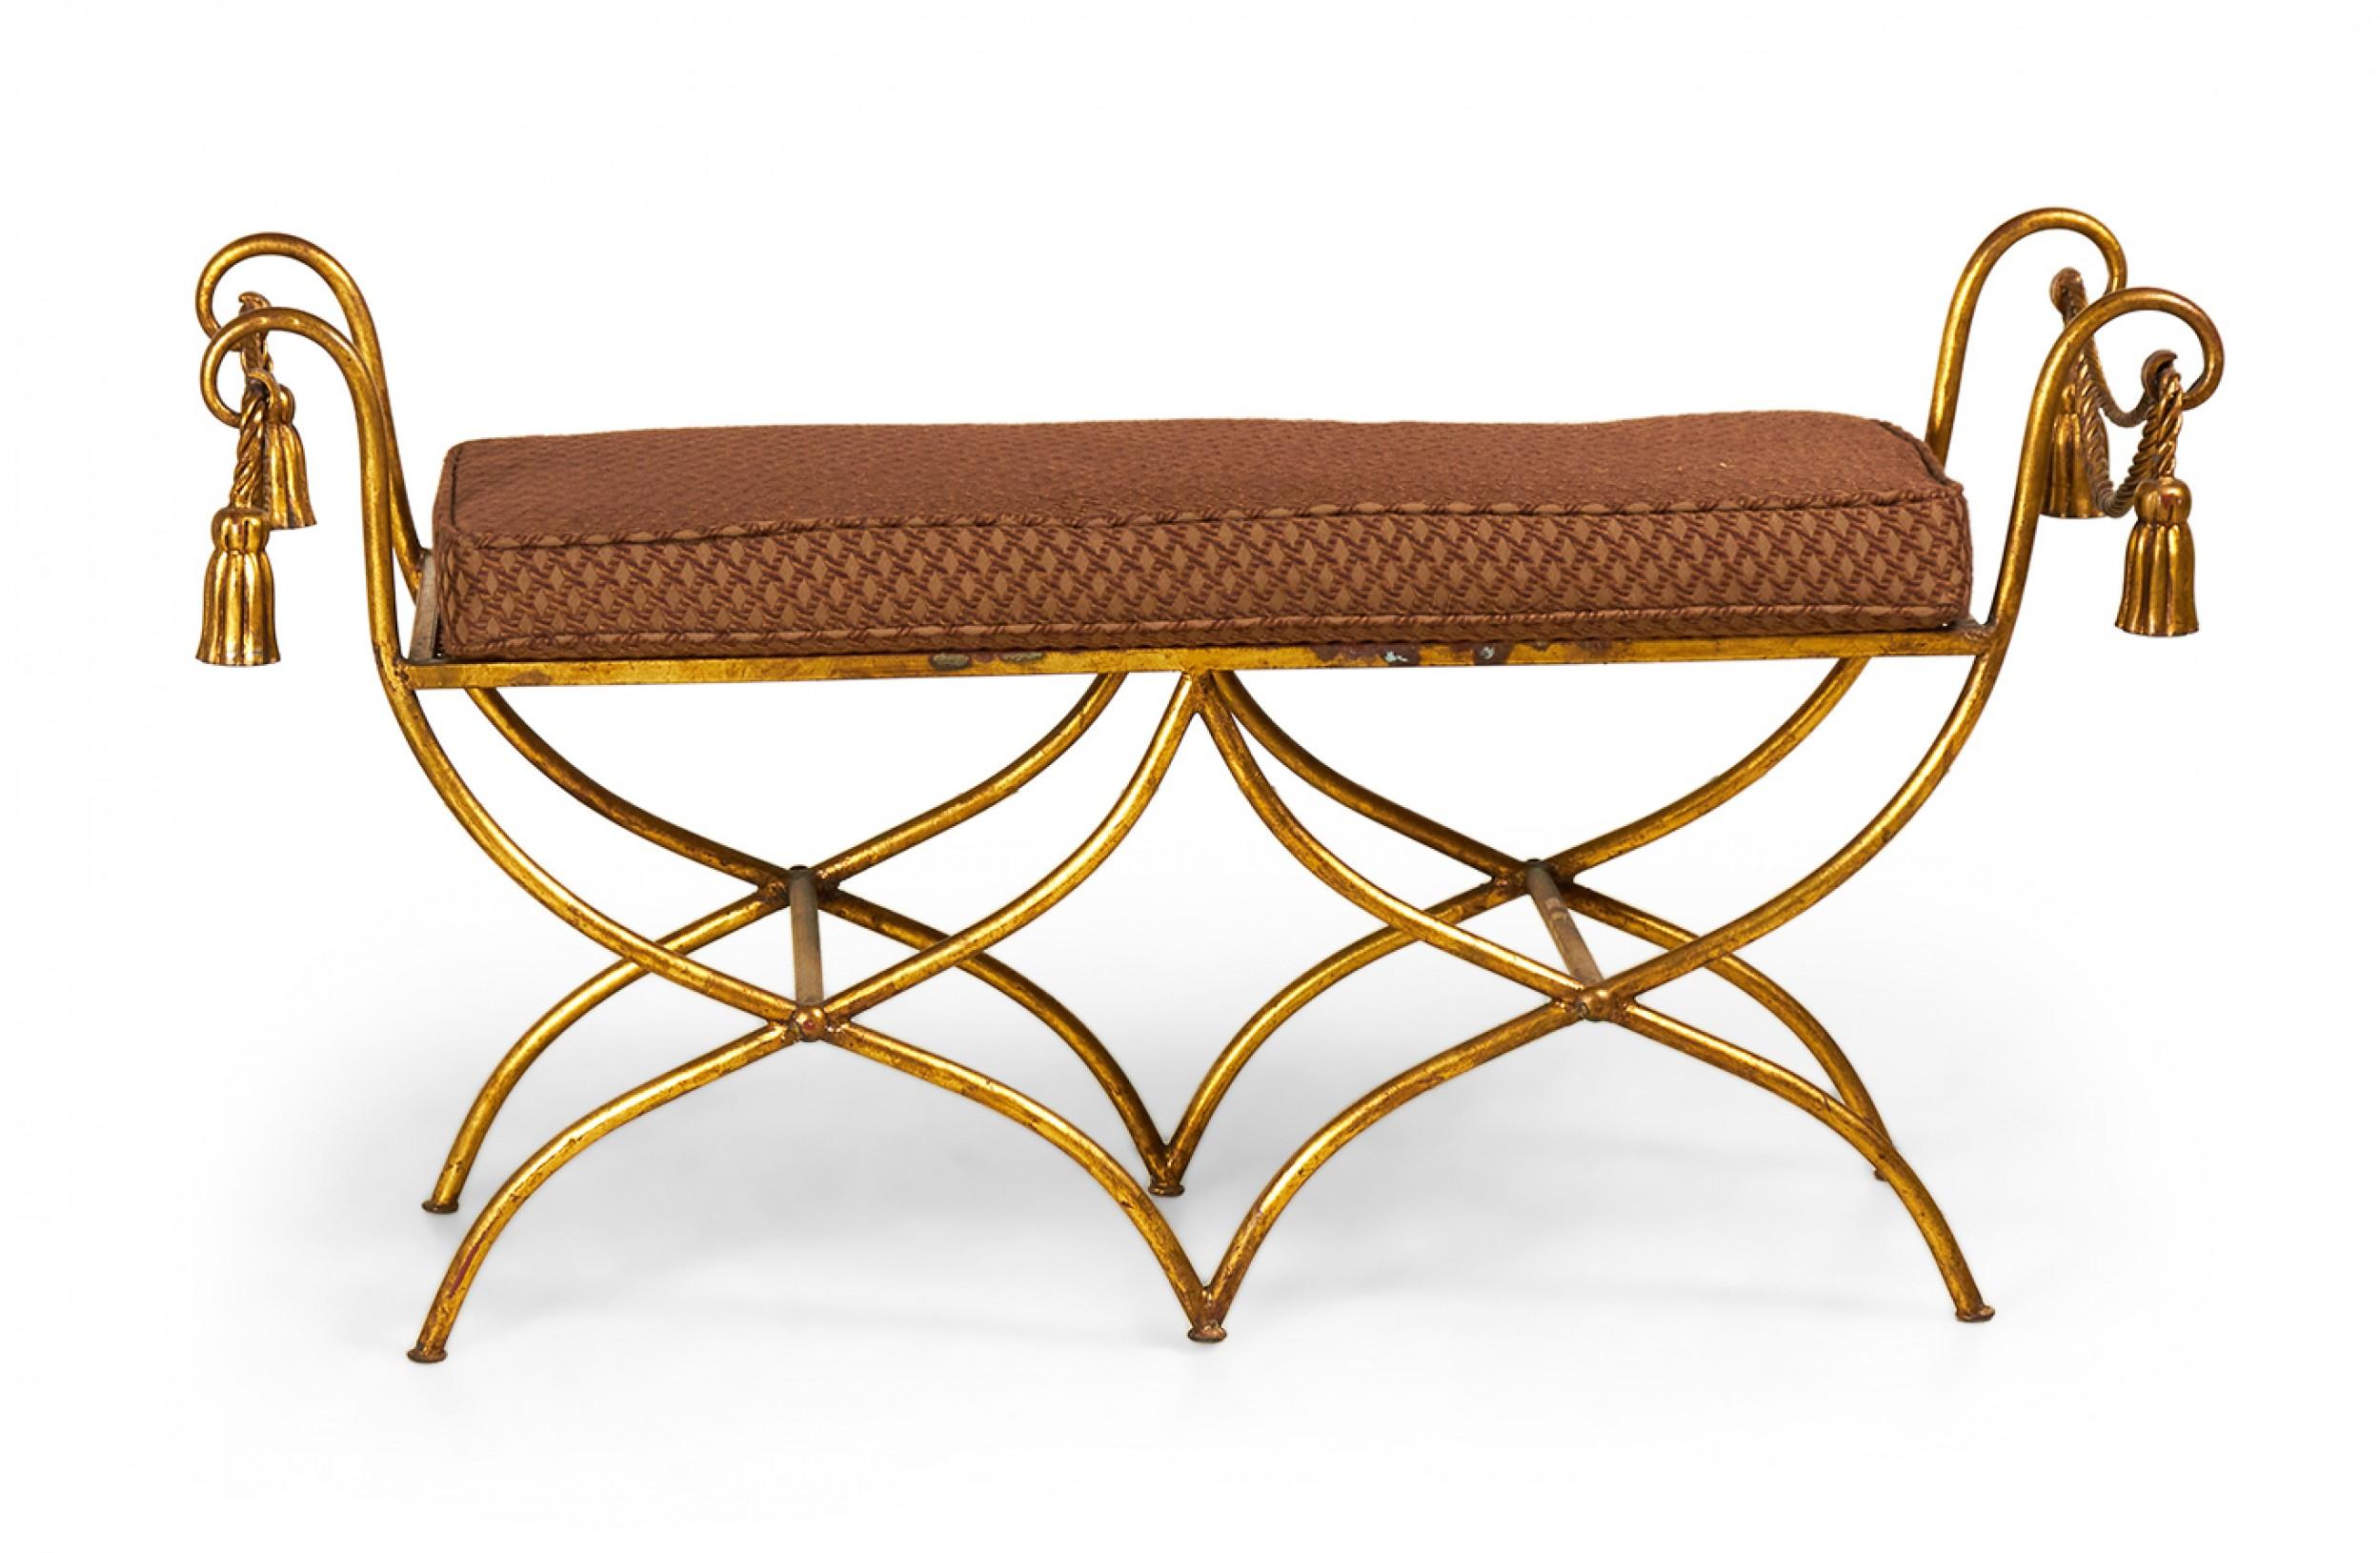 Palladio Italy Baroque Style Rope and Tassel Gilt Iron Window Bench In Good Condition For Sale In New York, NY